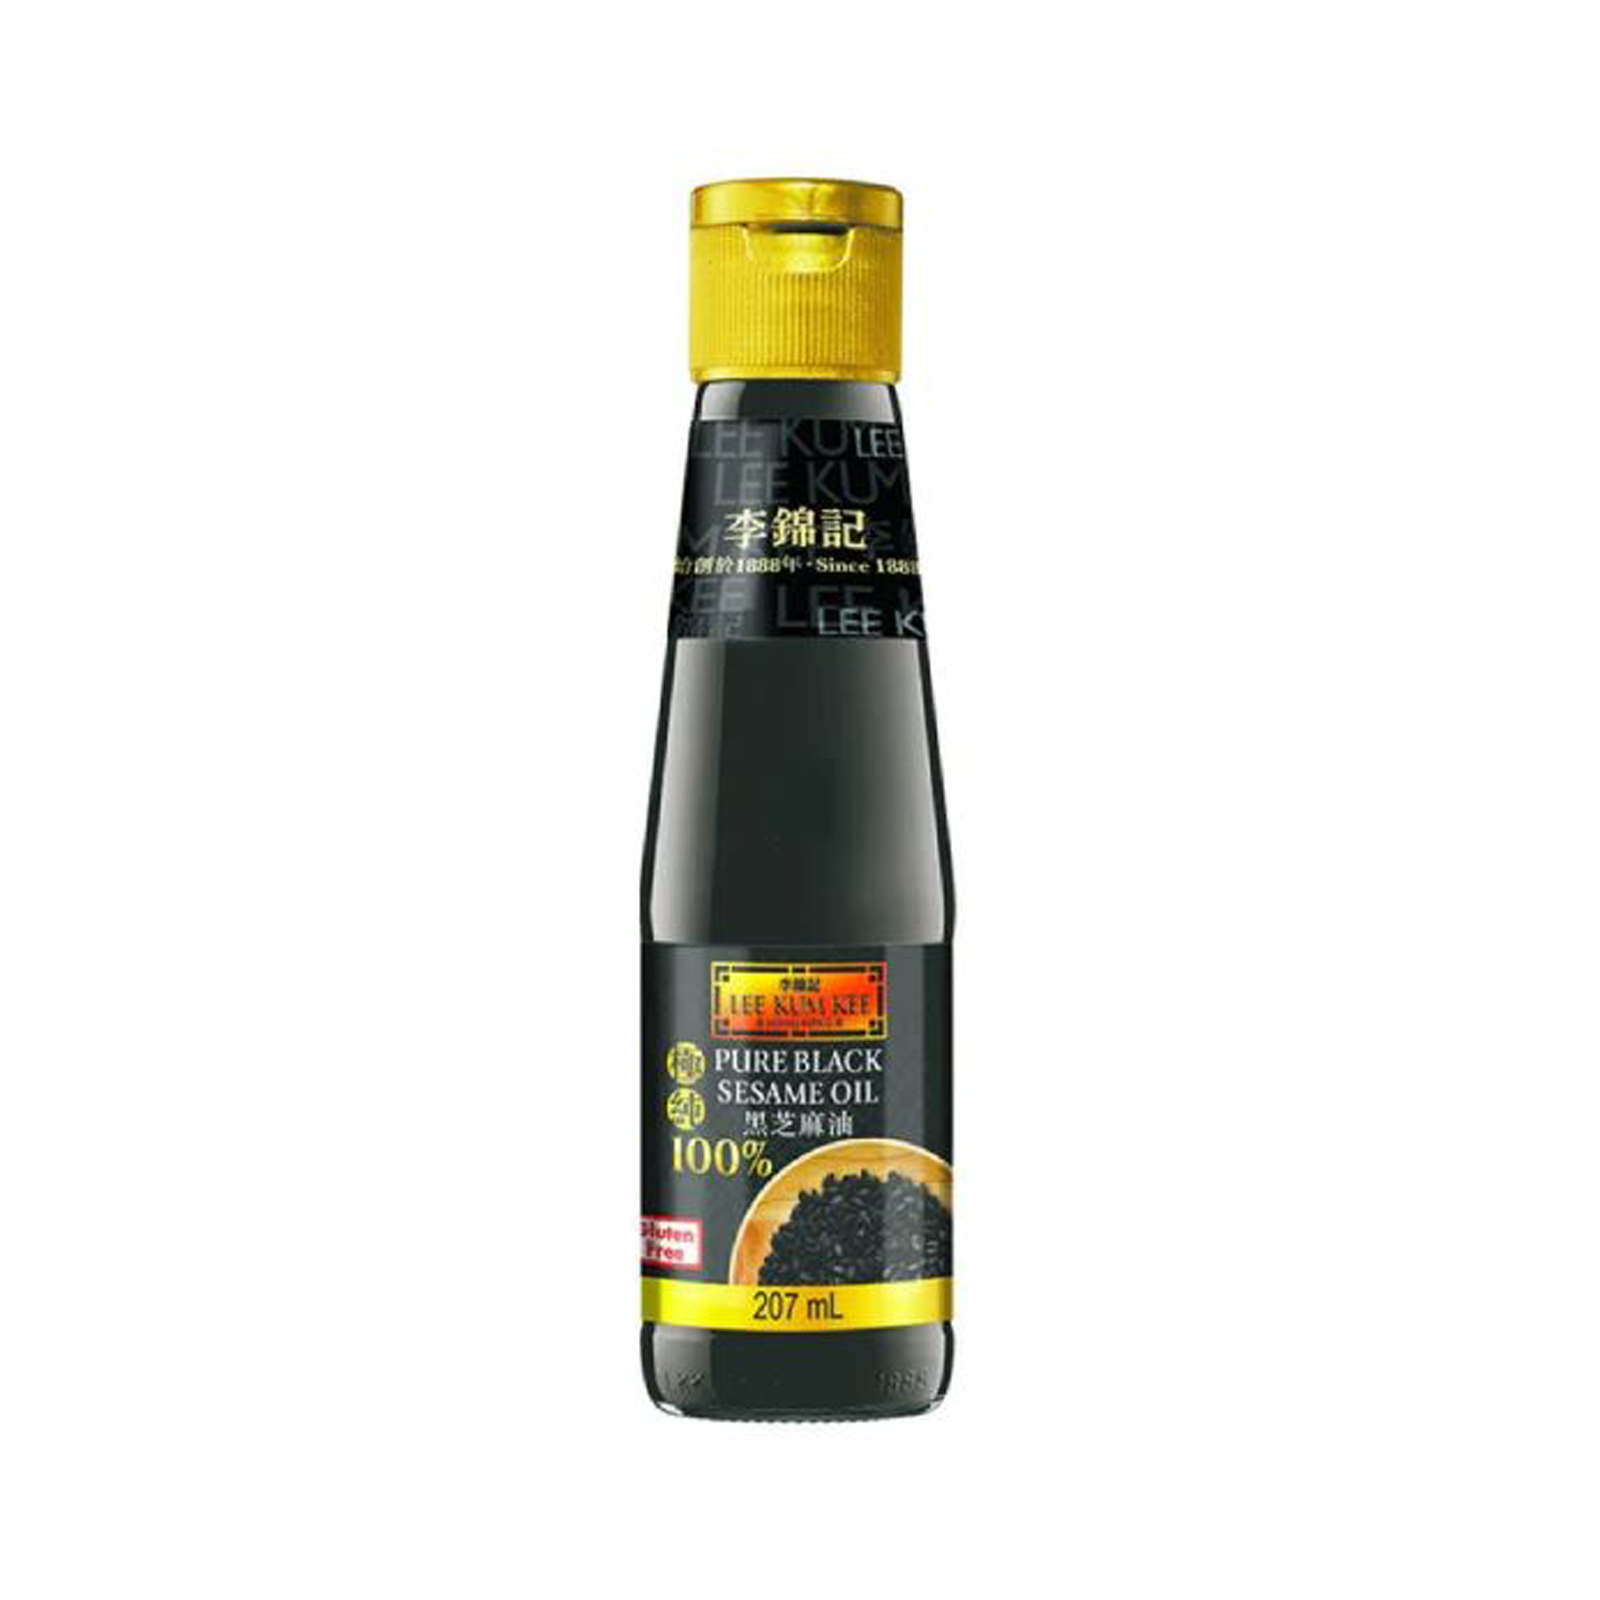 Pure Black Sesame Oil / Products / Cardinal